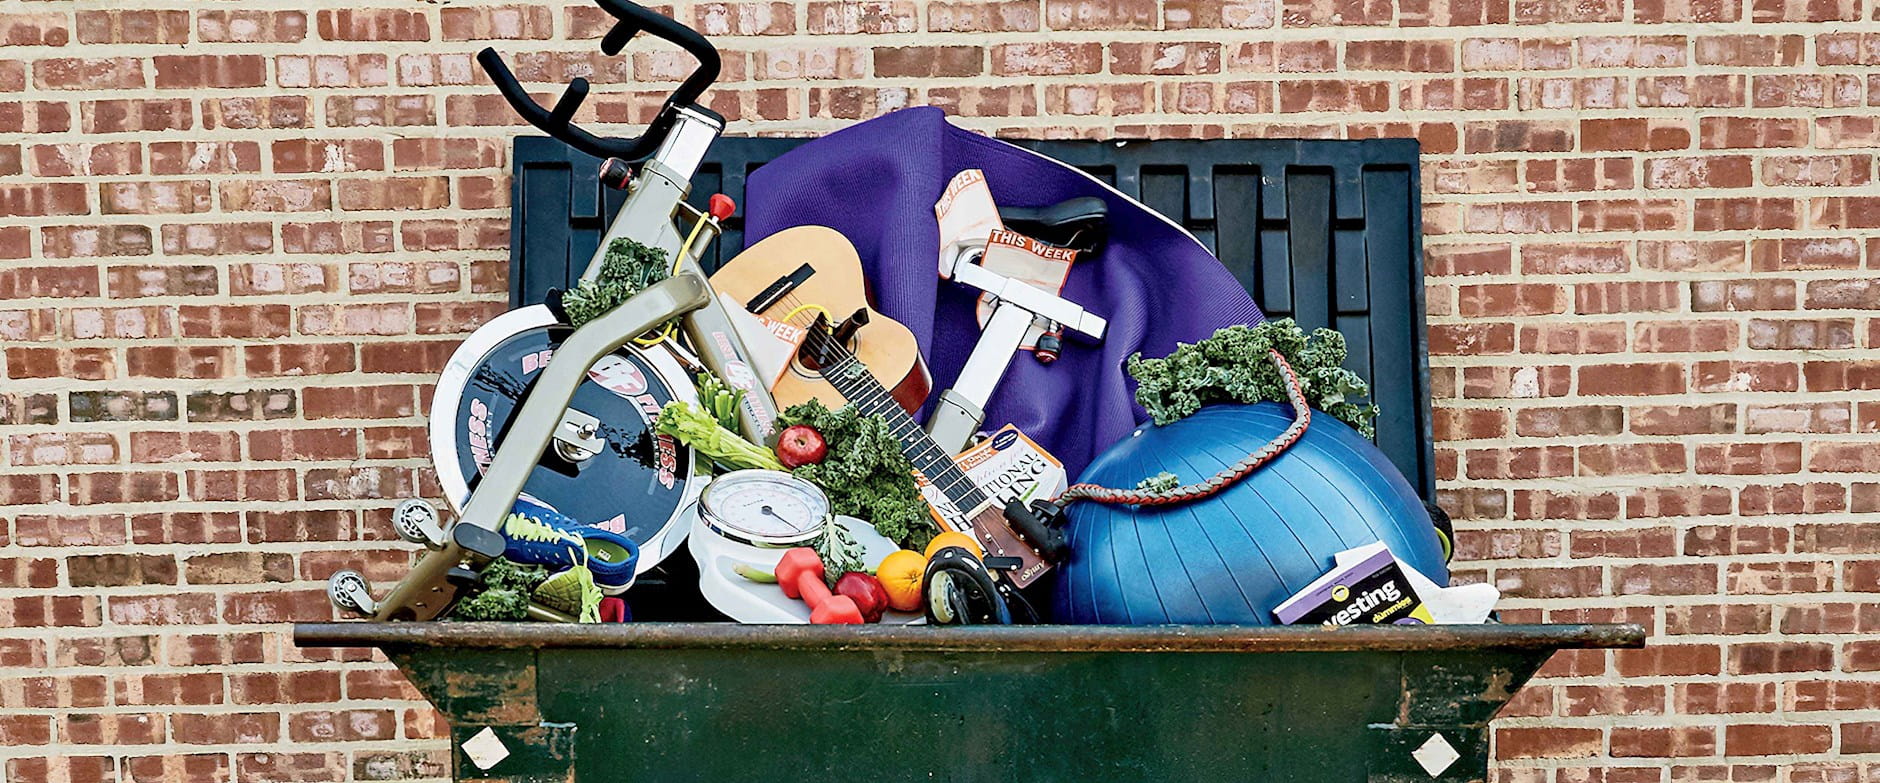 Dumpster filled with hobby items like a guitar and exercise ball